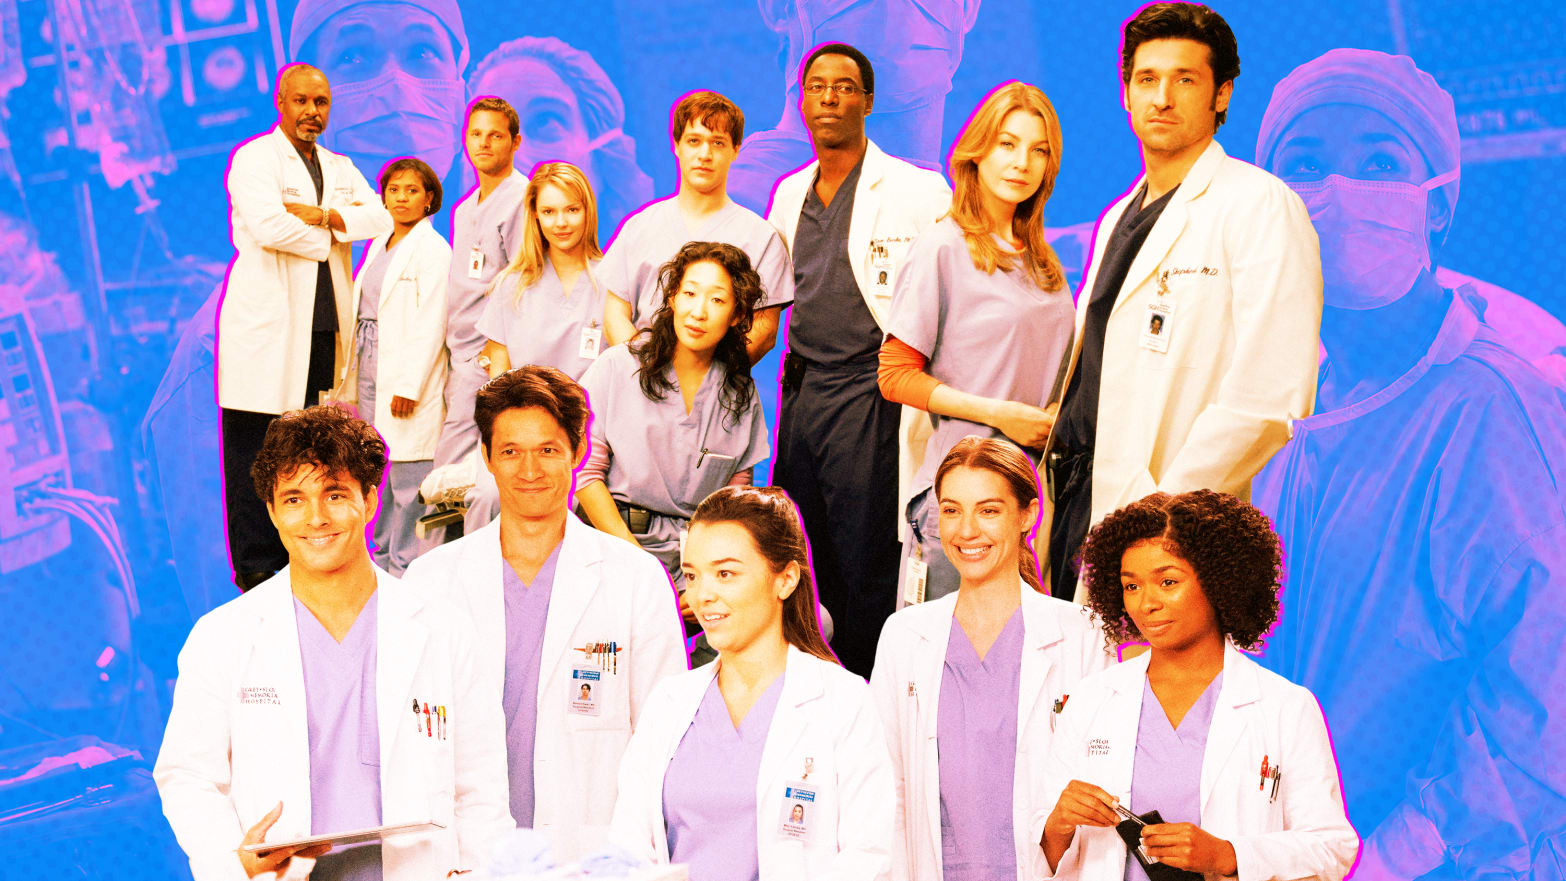 A photo illustration of the first season cast of Grey’s Anatomy, and the newest cast, Niko Terho, Harry Shum Jr., Midori Francis, Adelaide Kane, and Alexis Floyd.